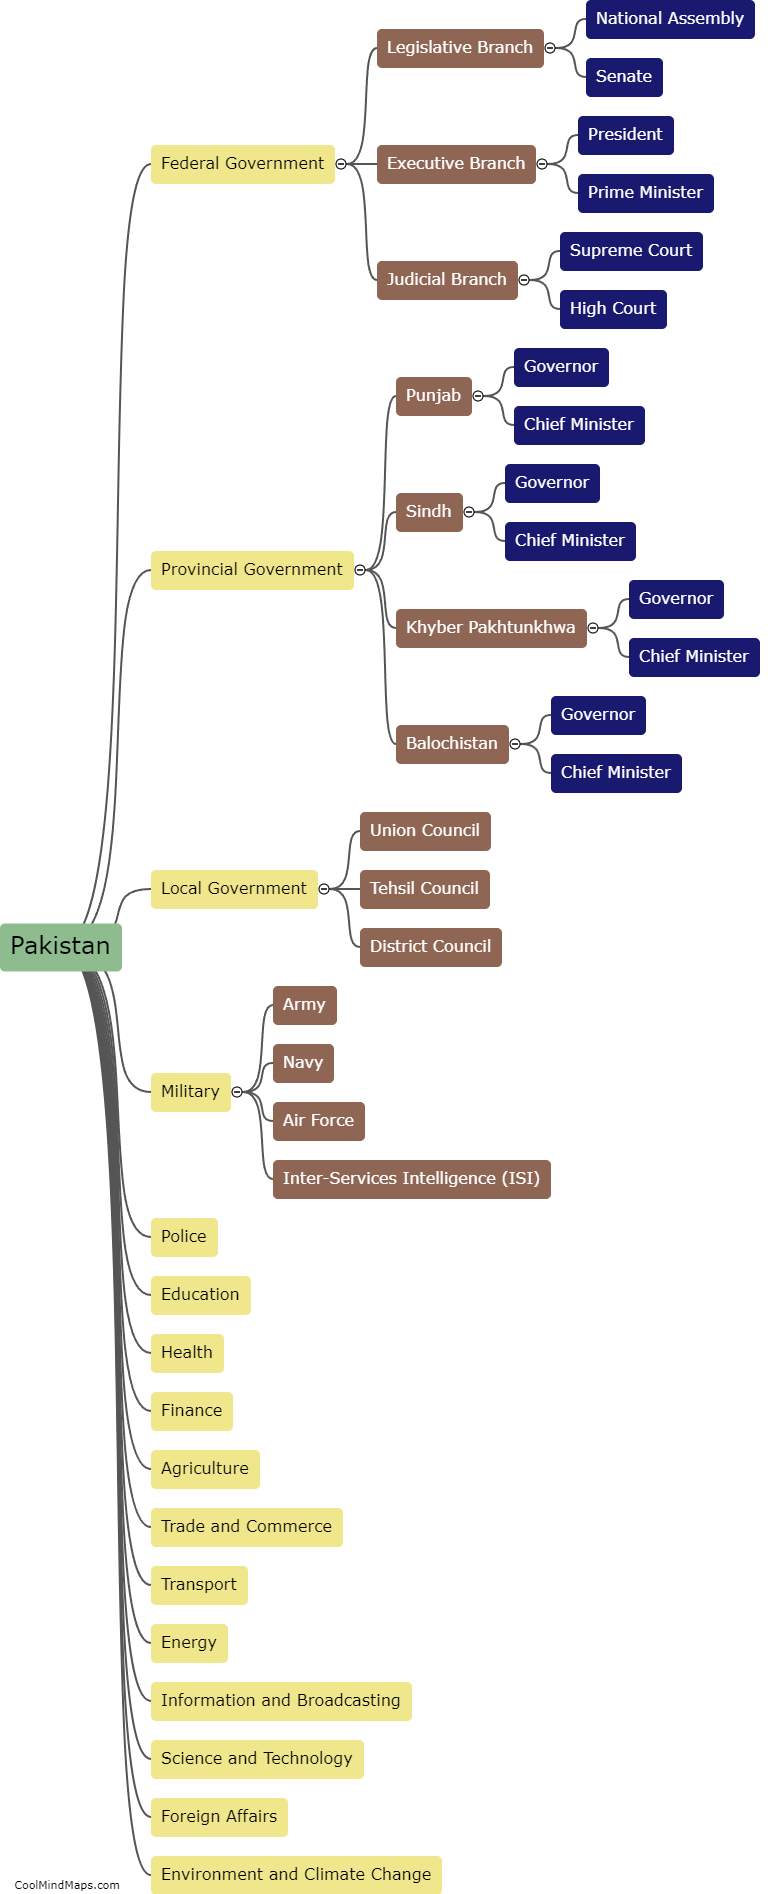 What are the roles of different divisions and departments in Pakistan?